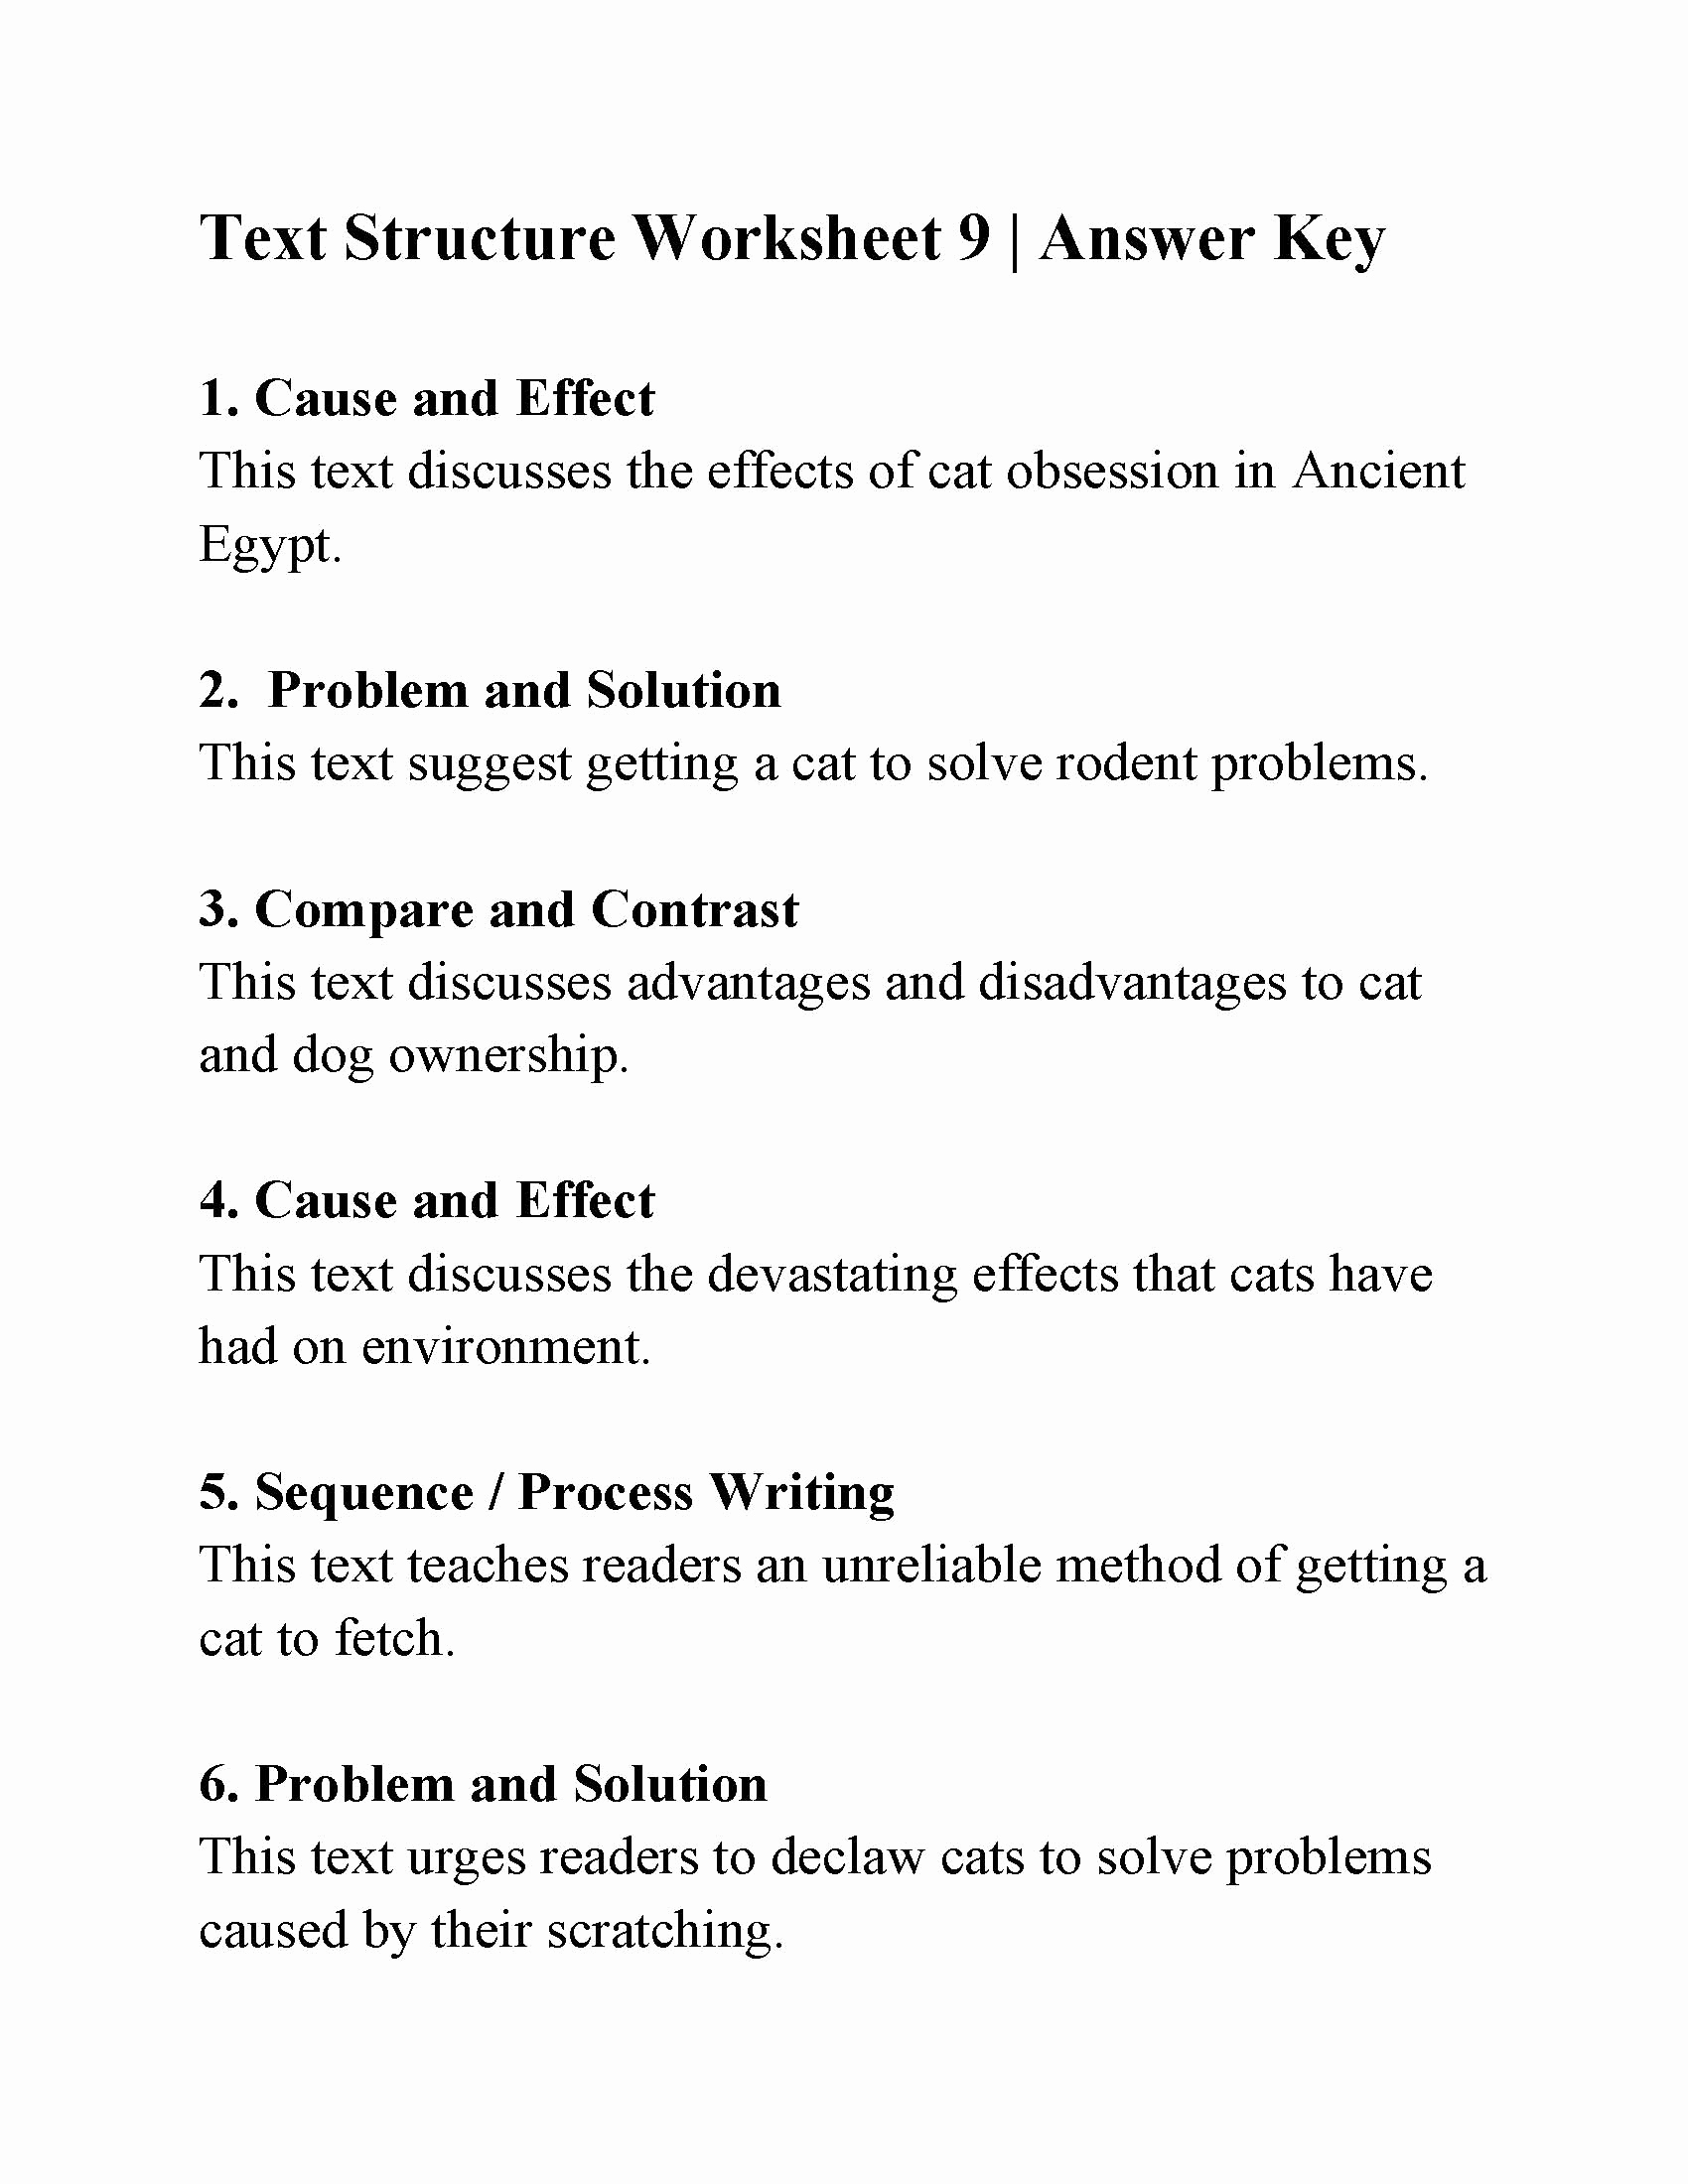 Text Structure Practice Worksheets Inspirational Text Structure Worksheet 9